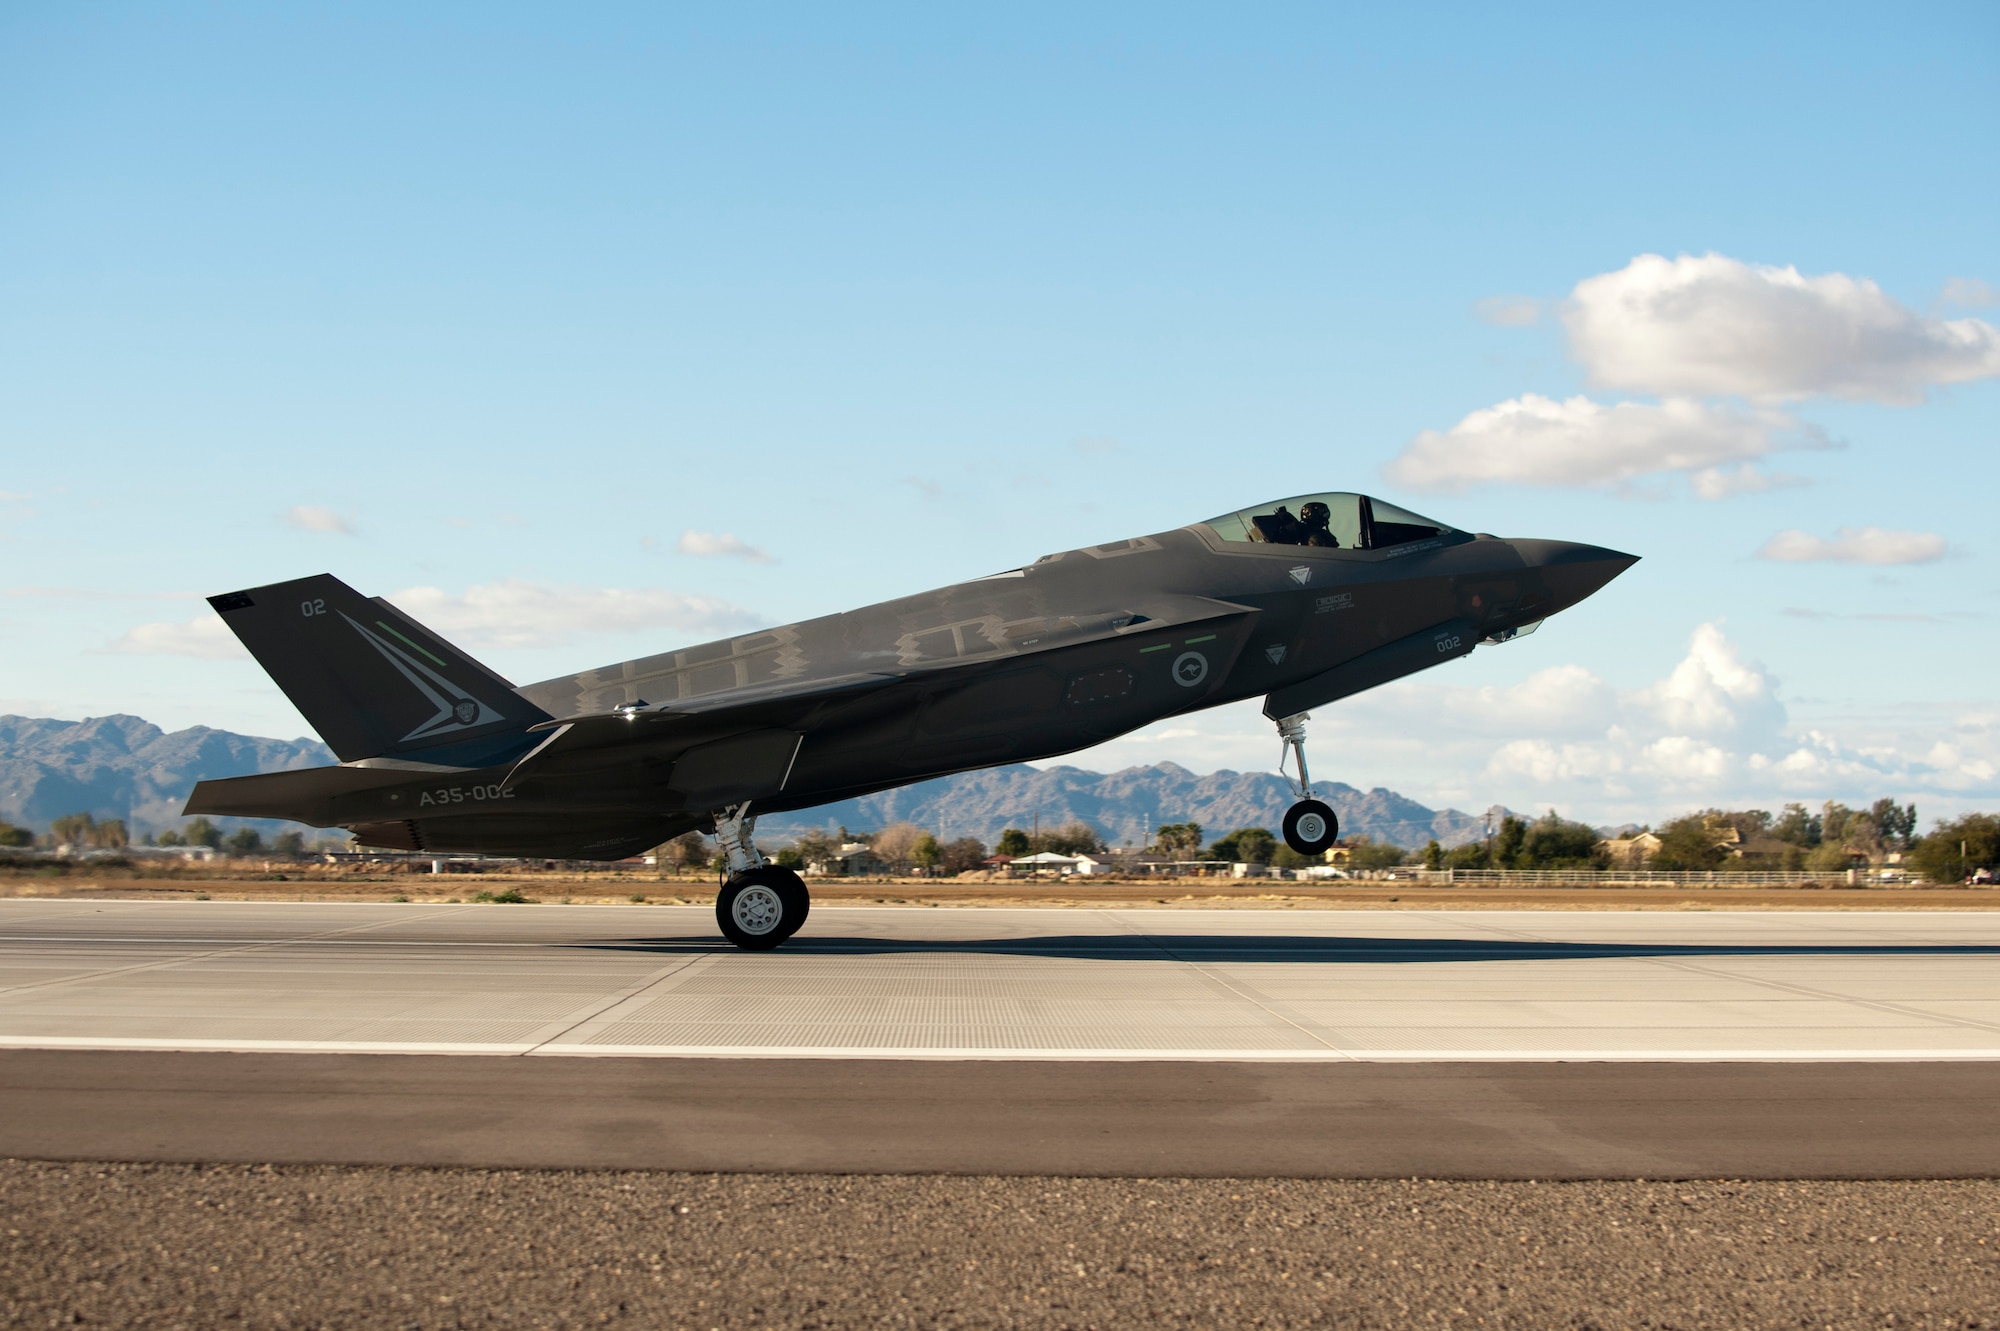 The first Royal Australian air force F-35A Lightning II jet arrived Dec. 18, 2014, at Luke Air Force Base, Ariz. The jet's arrival marks the first international partner F-35 to arrive for training at Luke AFB. (U.S. Air Force photo/Staff Sgt. Staci Miller) 